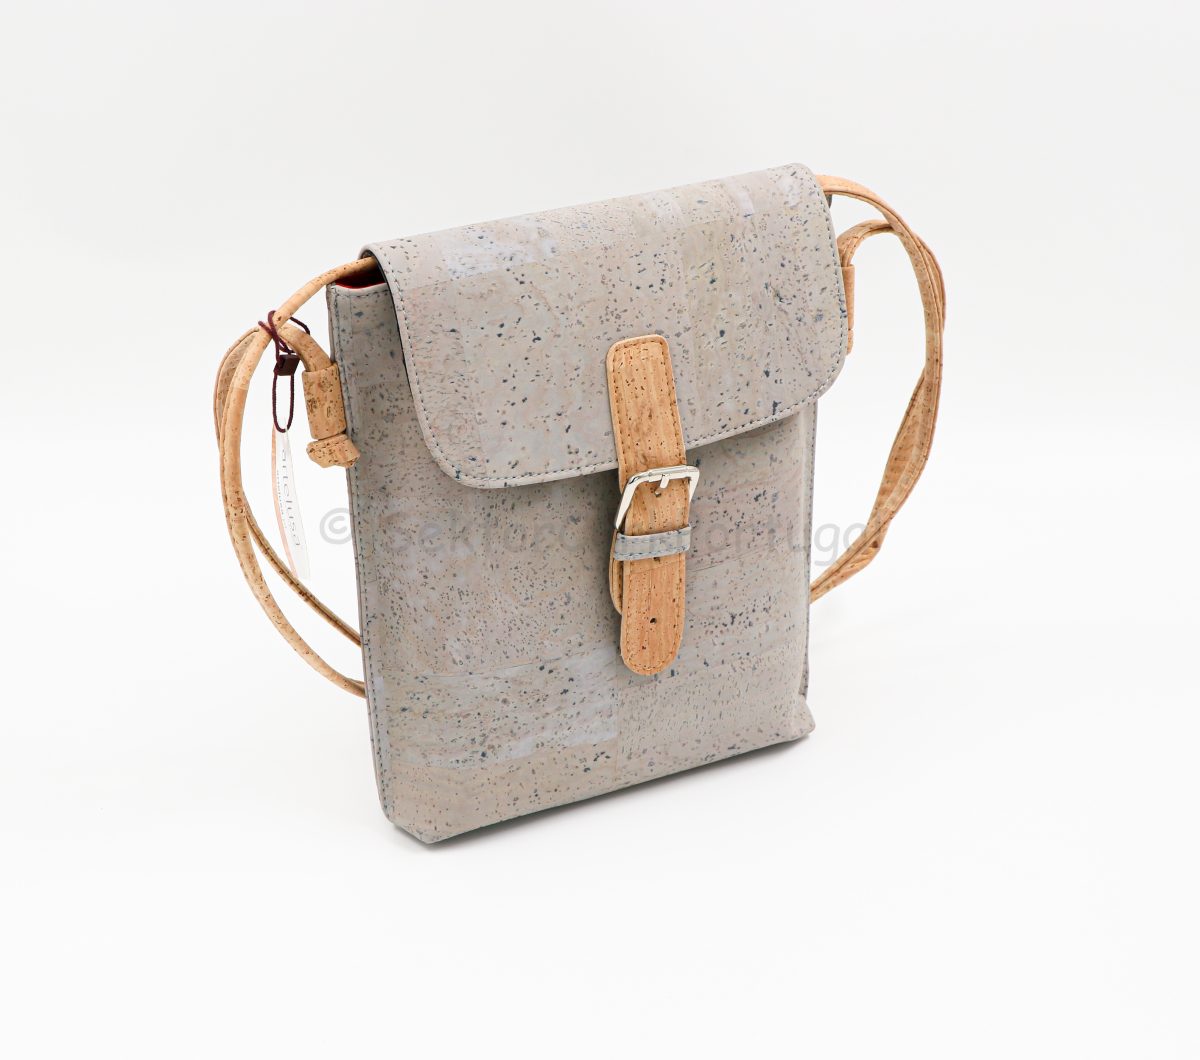 GREY CROSSBODY BAG WITH DETAILS IN NATURAL CORK - SektorCorkPortugal